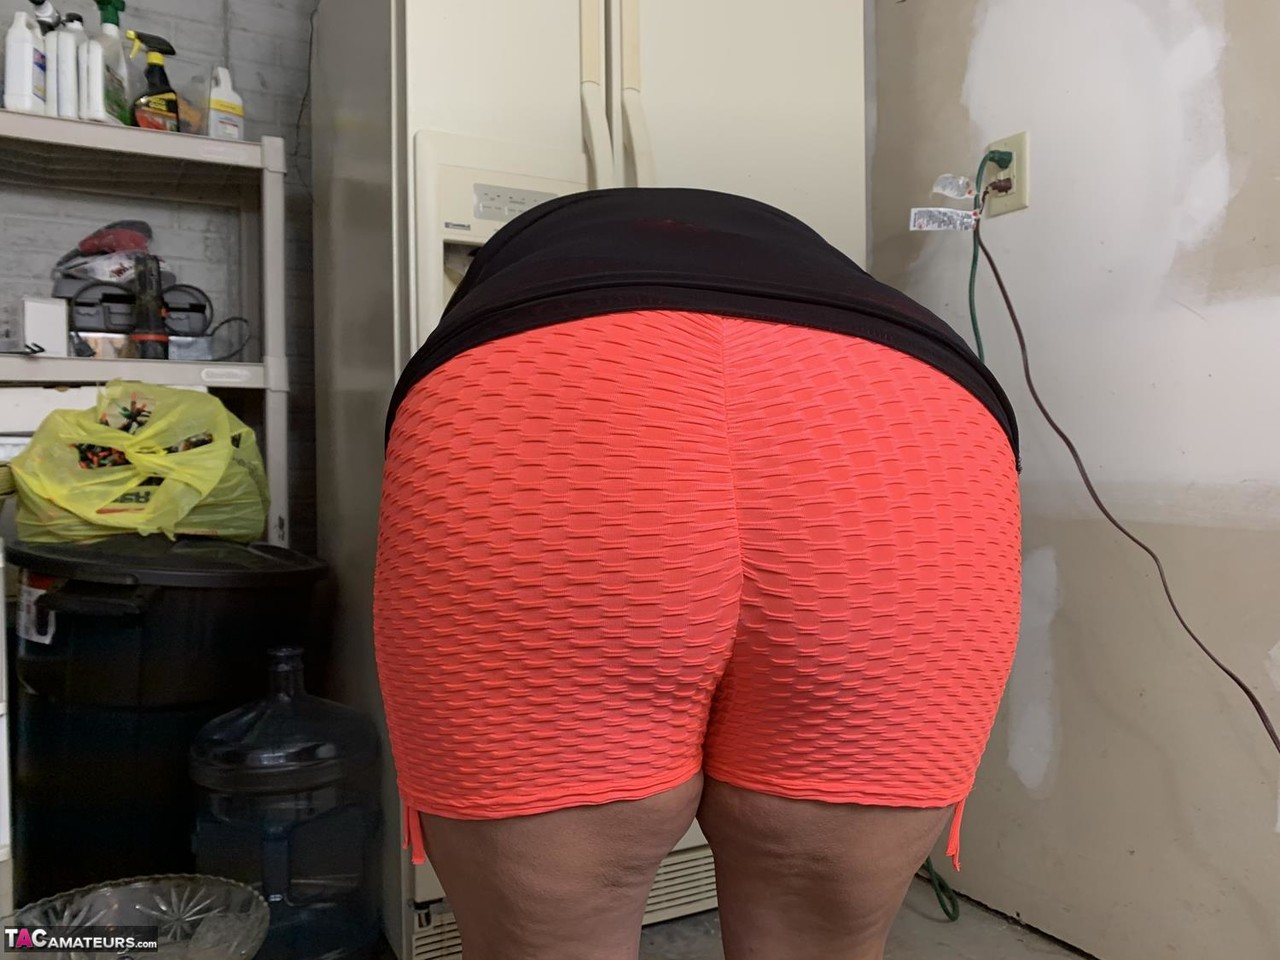 Plump amateur Sexy Nebbw sticks out her tongue after showing her big ass 色情照片 #428042210 | TAC Amateurs Pics, Sexy Nebbw, BBW, 手机色情